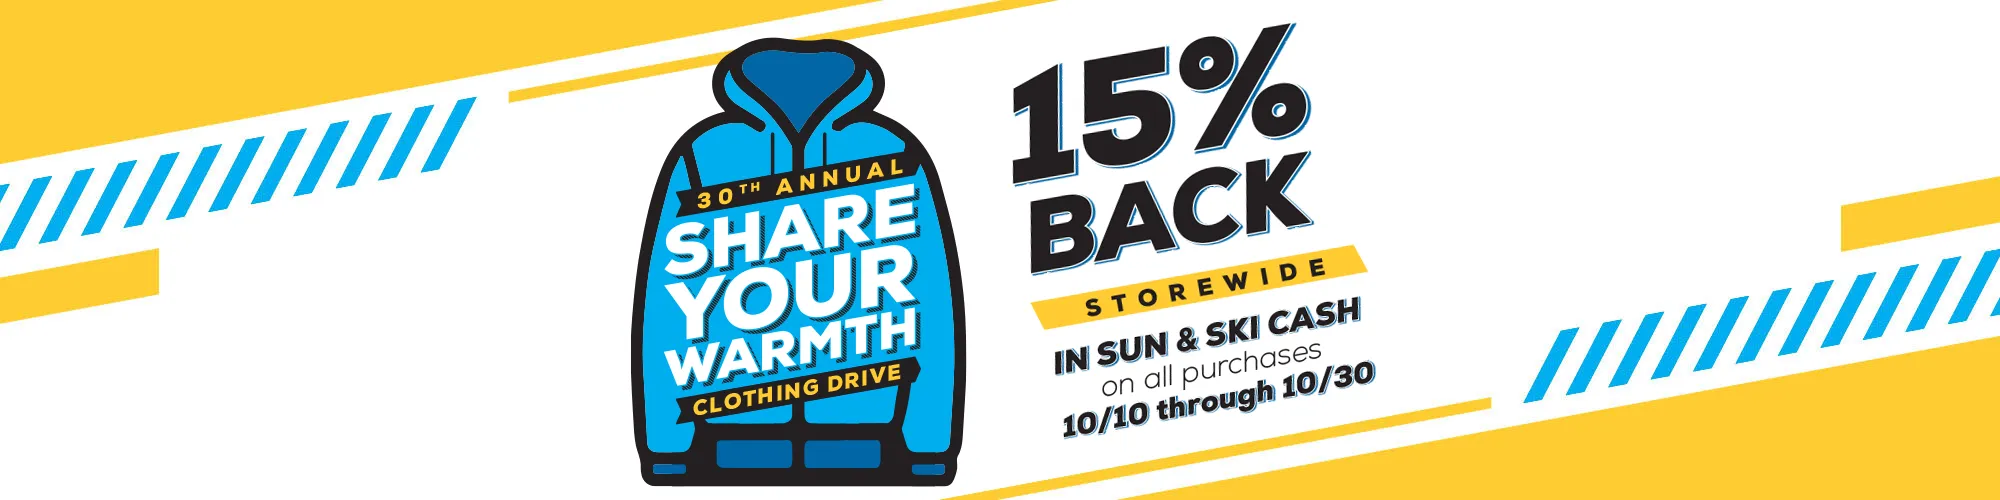 Share Your Warmth. 10% Back store wide in Sun & Ski Cash on all purchases 10/10 through 10/30